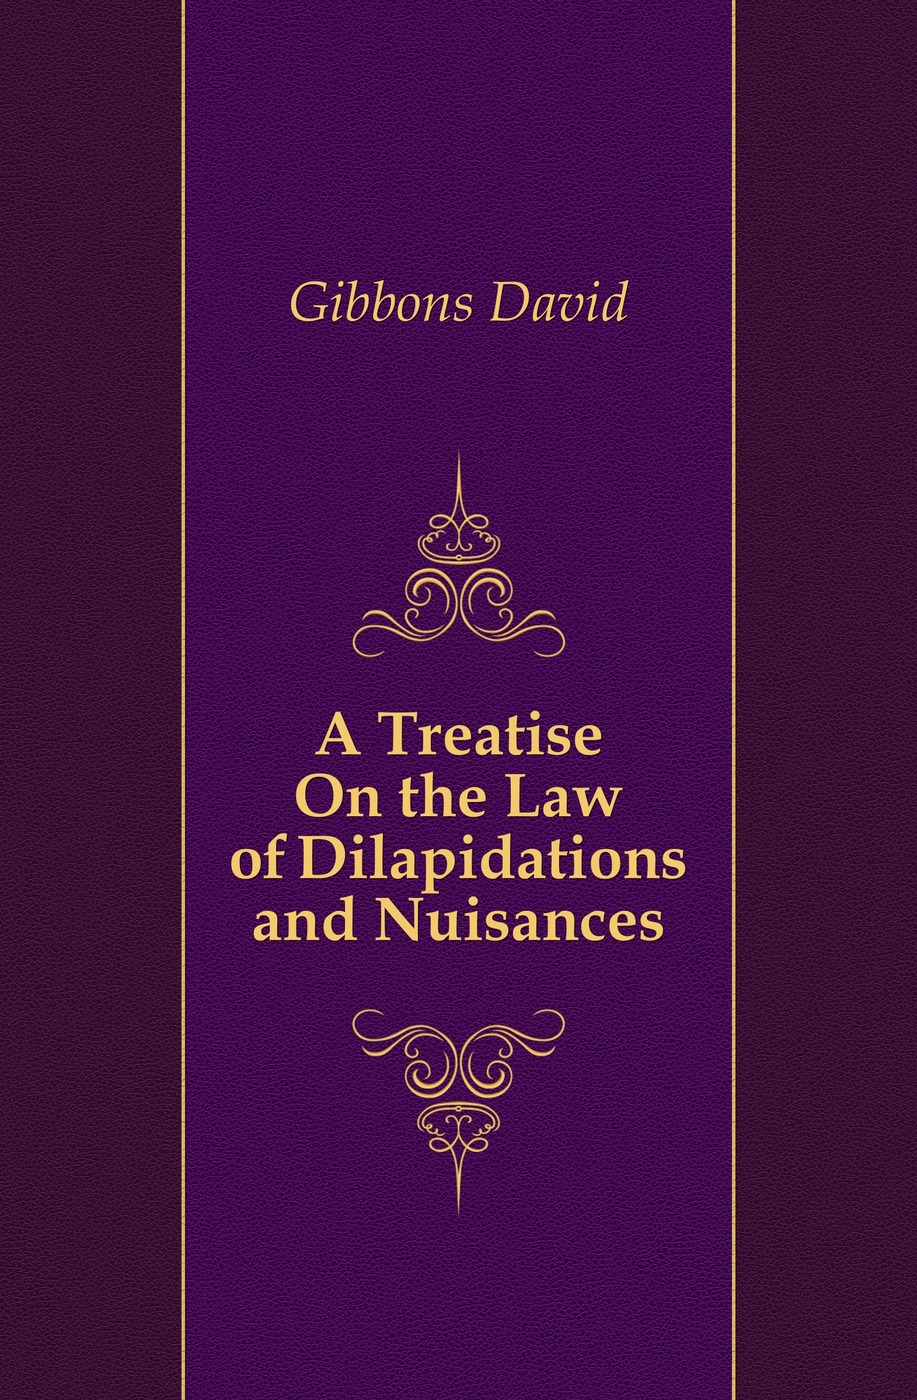 A Treatise On the Law of Dilapidations and Nuisances